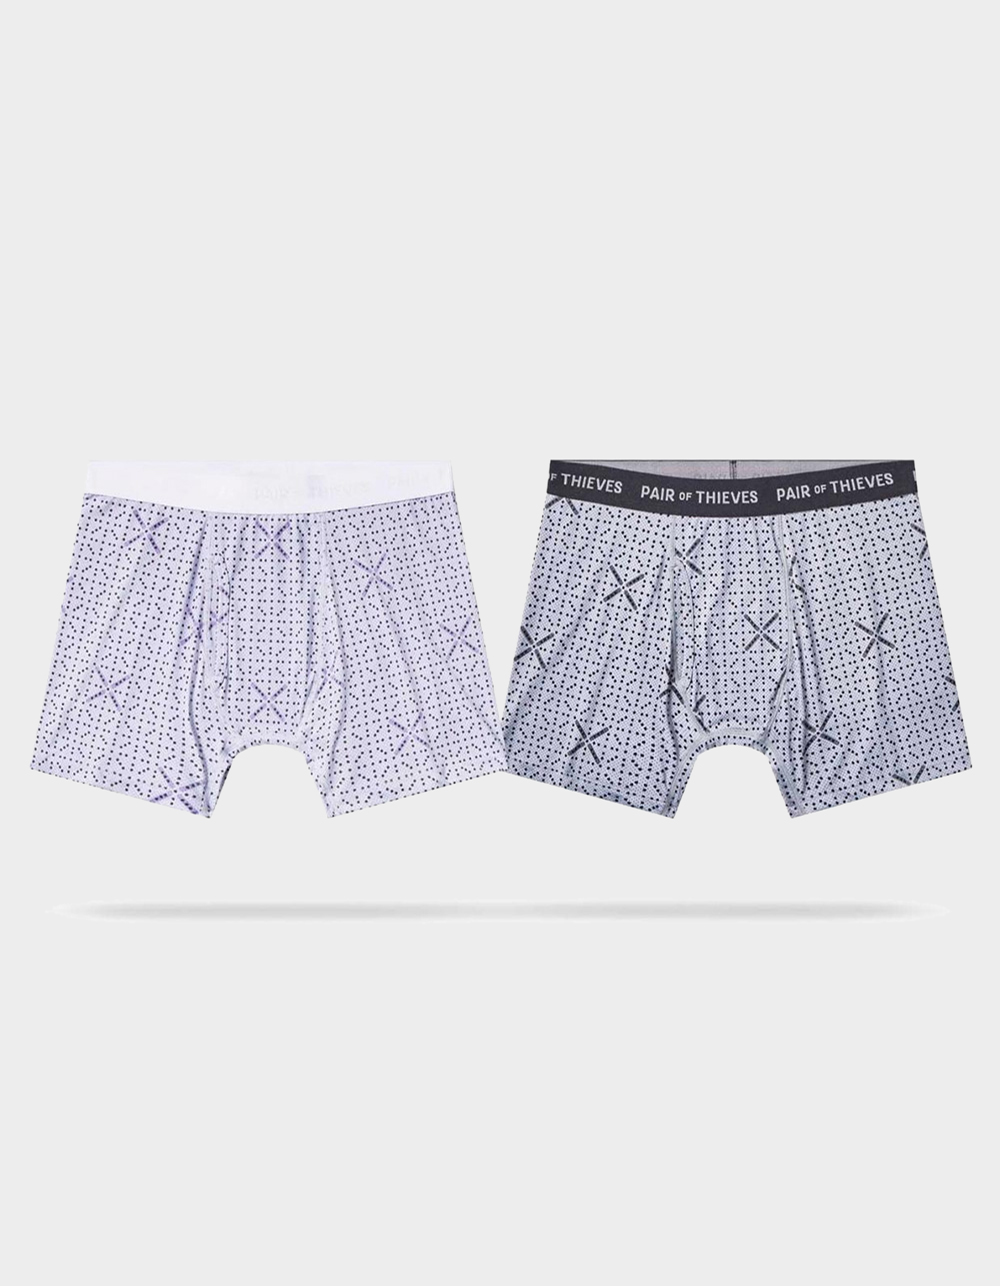  Pair Of Thieves Super Fit Underwear For Men Pack